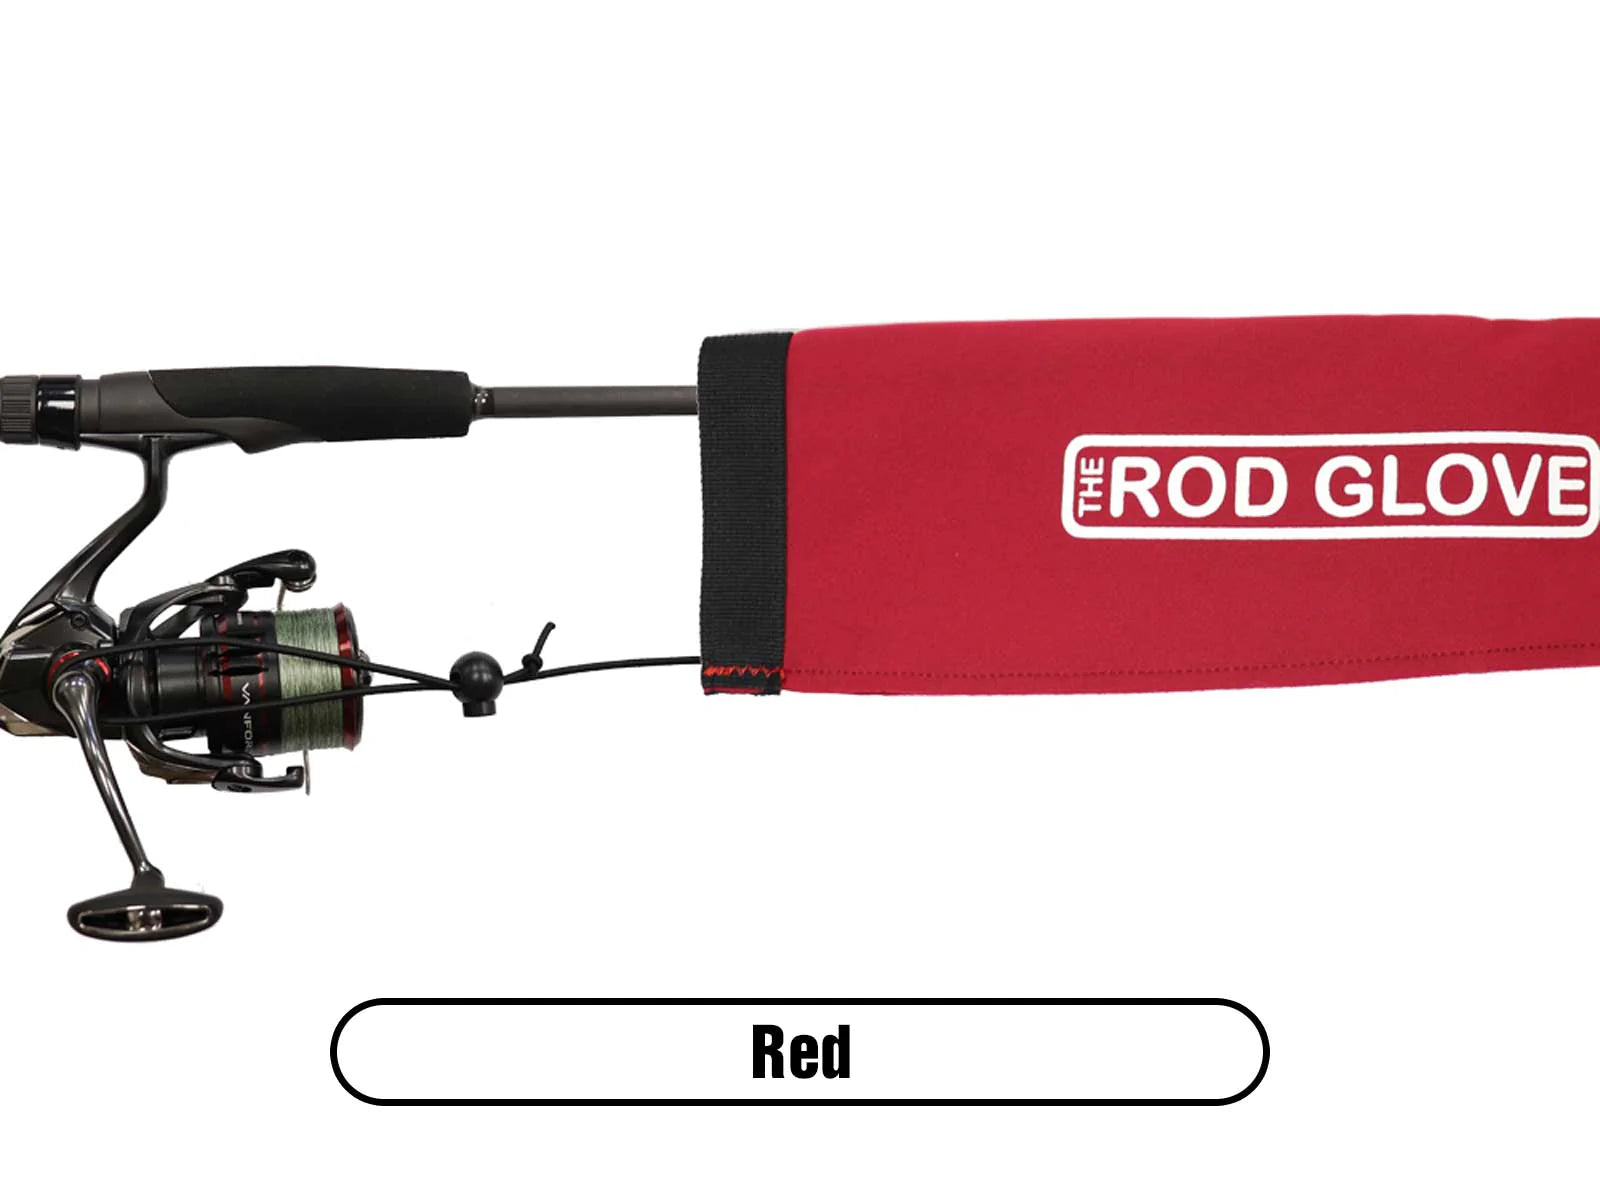 Buy red THE ROD GLOVE TOURNAMENT SERIES SPINNING ROD GLOVE